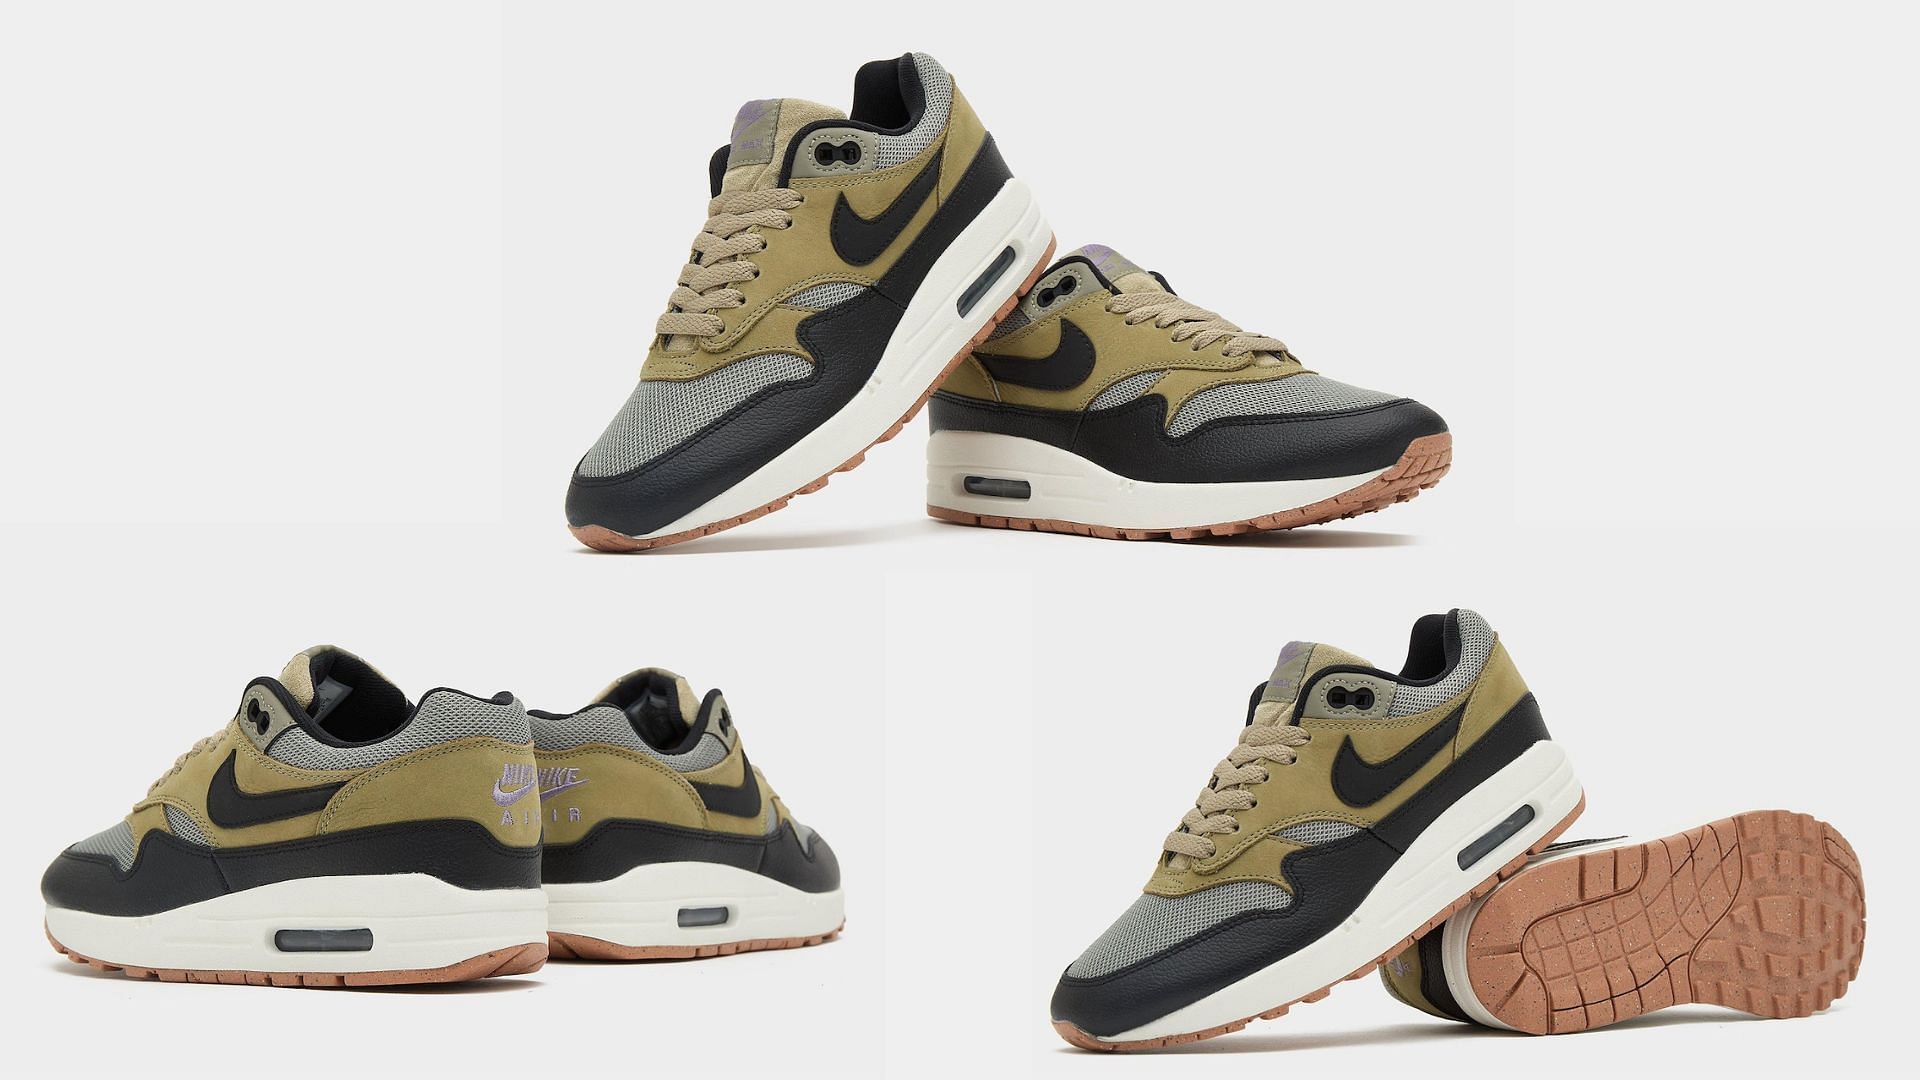 Nike: Nike Air Max 1 “Dark Stucco Black” shoes: Where to get, price, and  more details explored